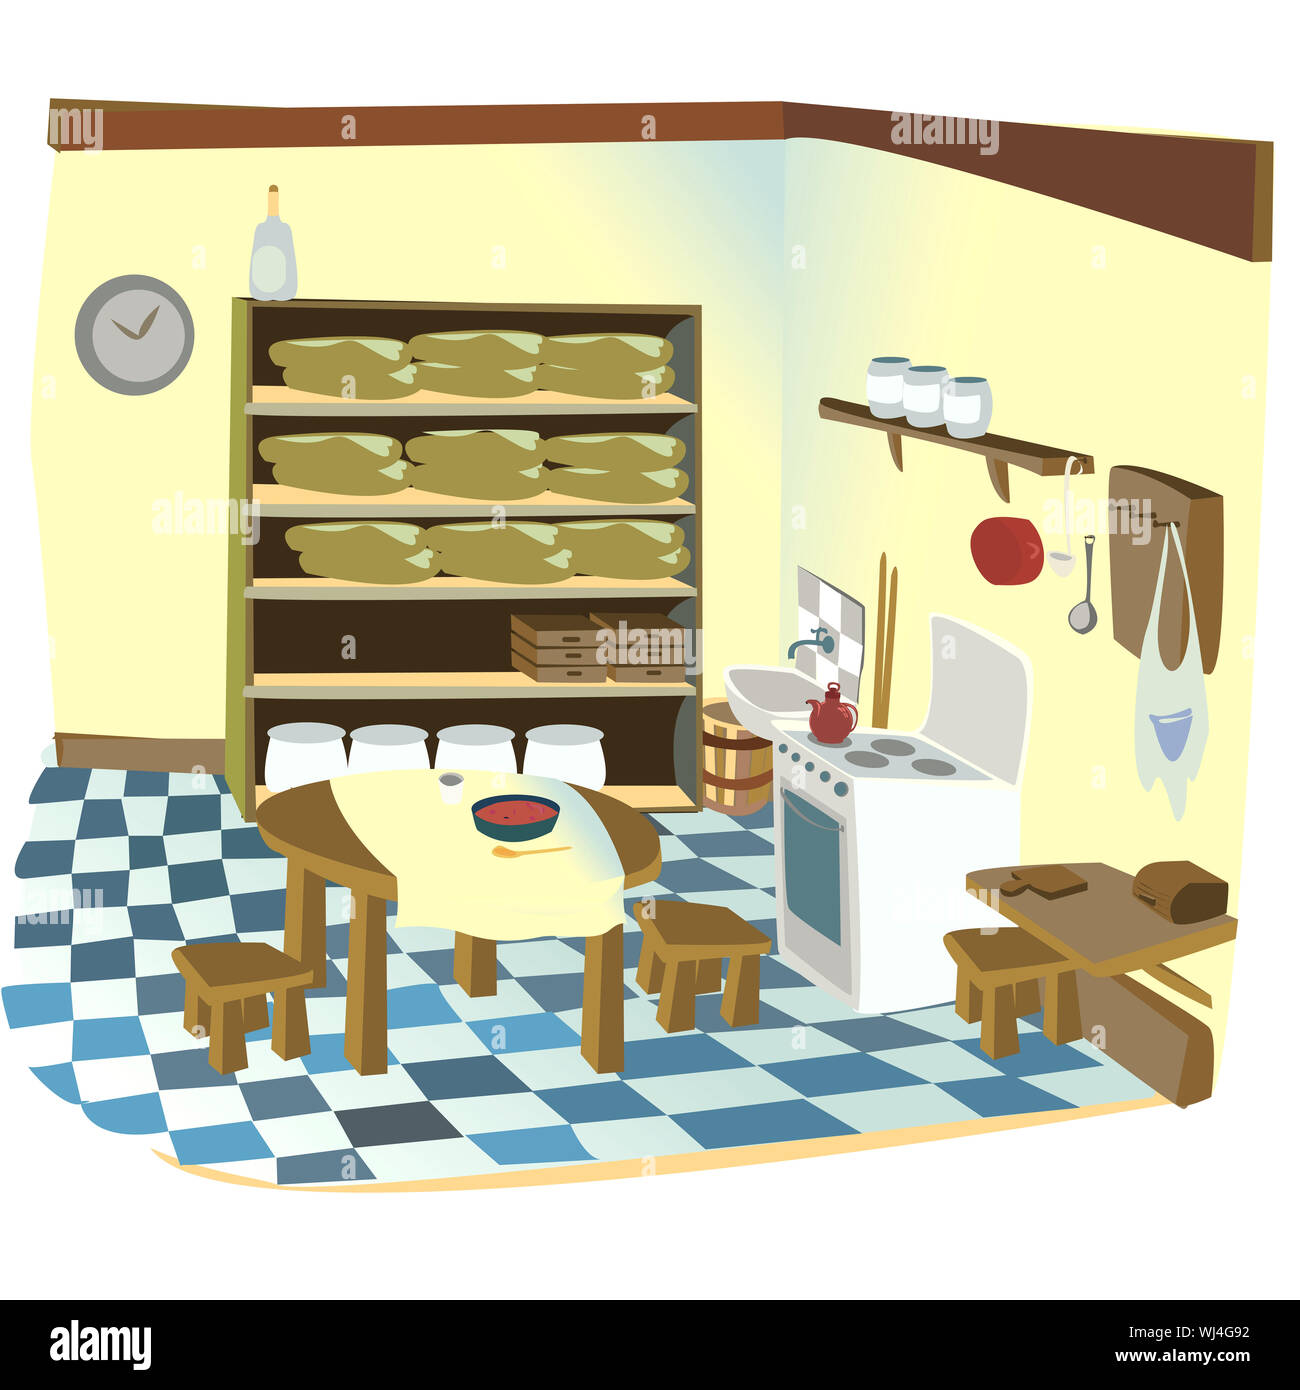 Cartoon illustration of a old rustic kitchen Stock Photo - Alamy